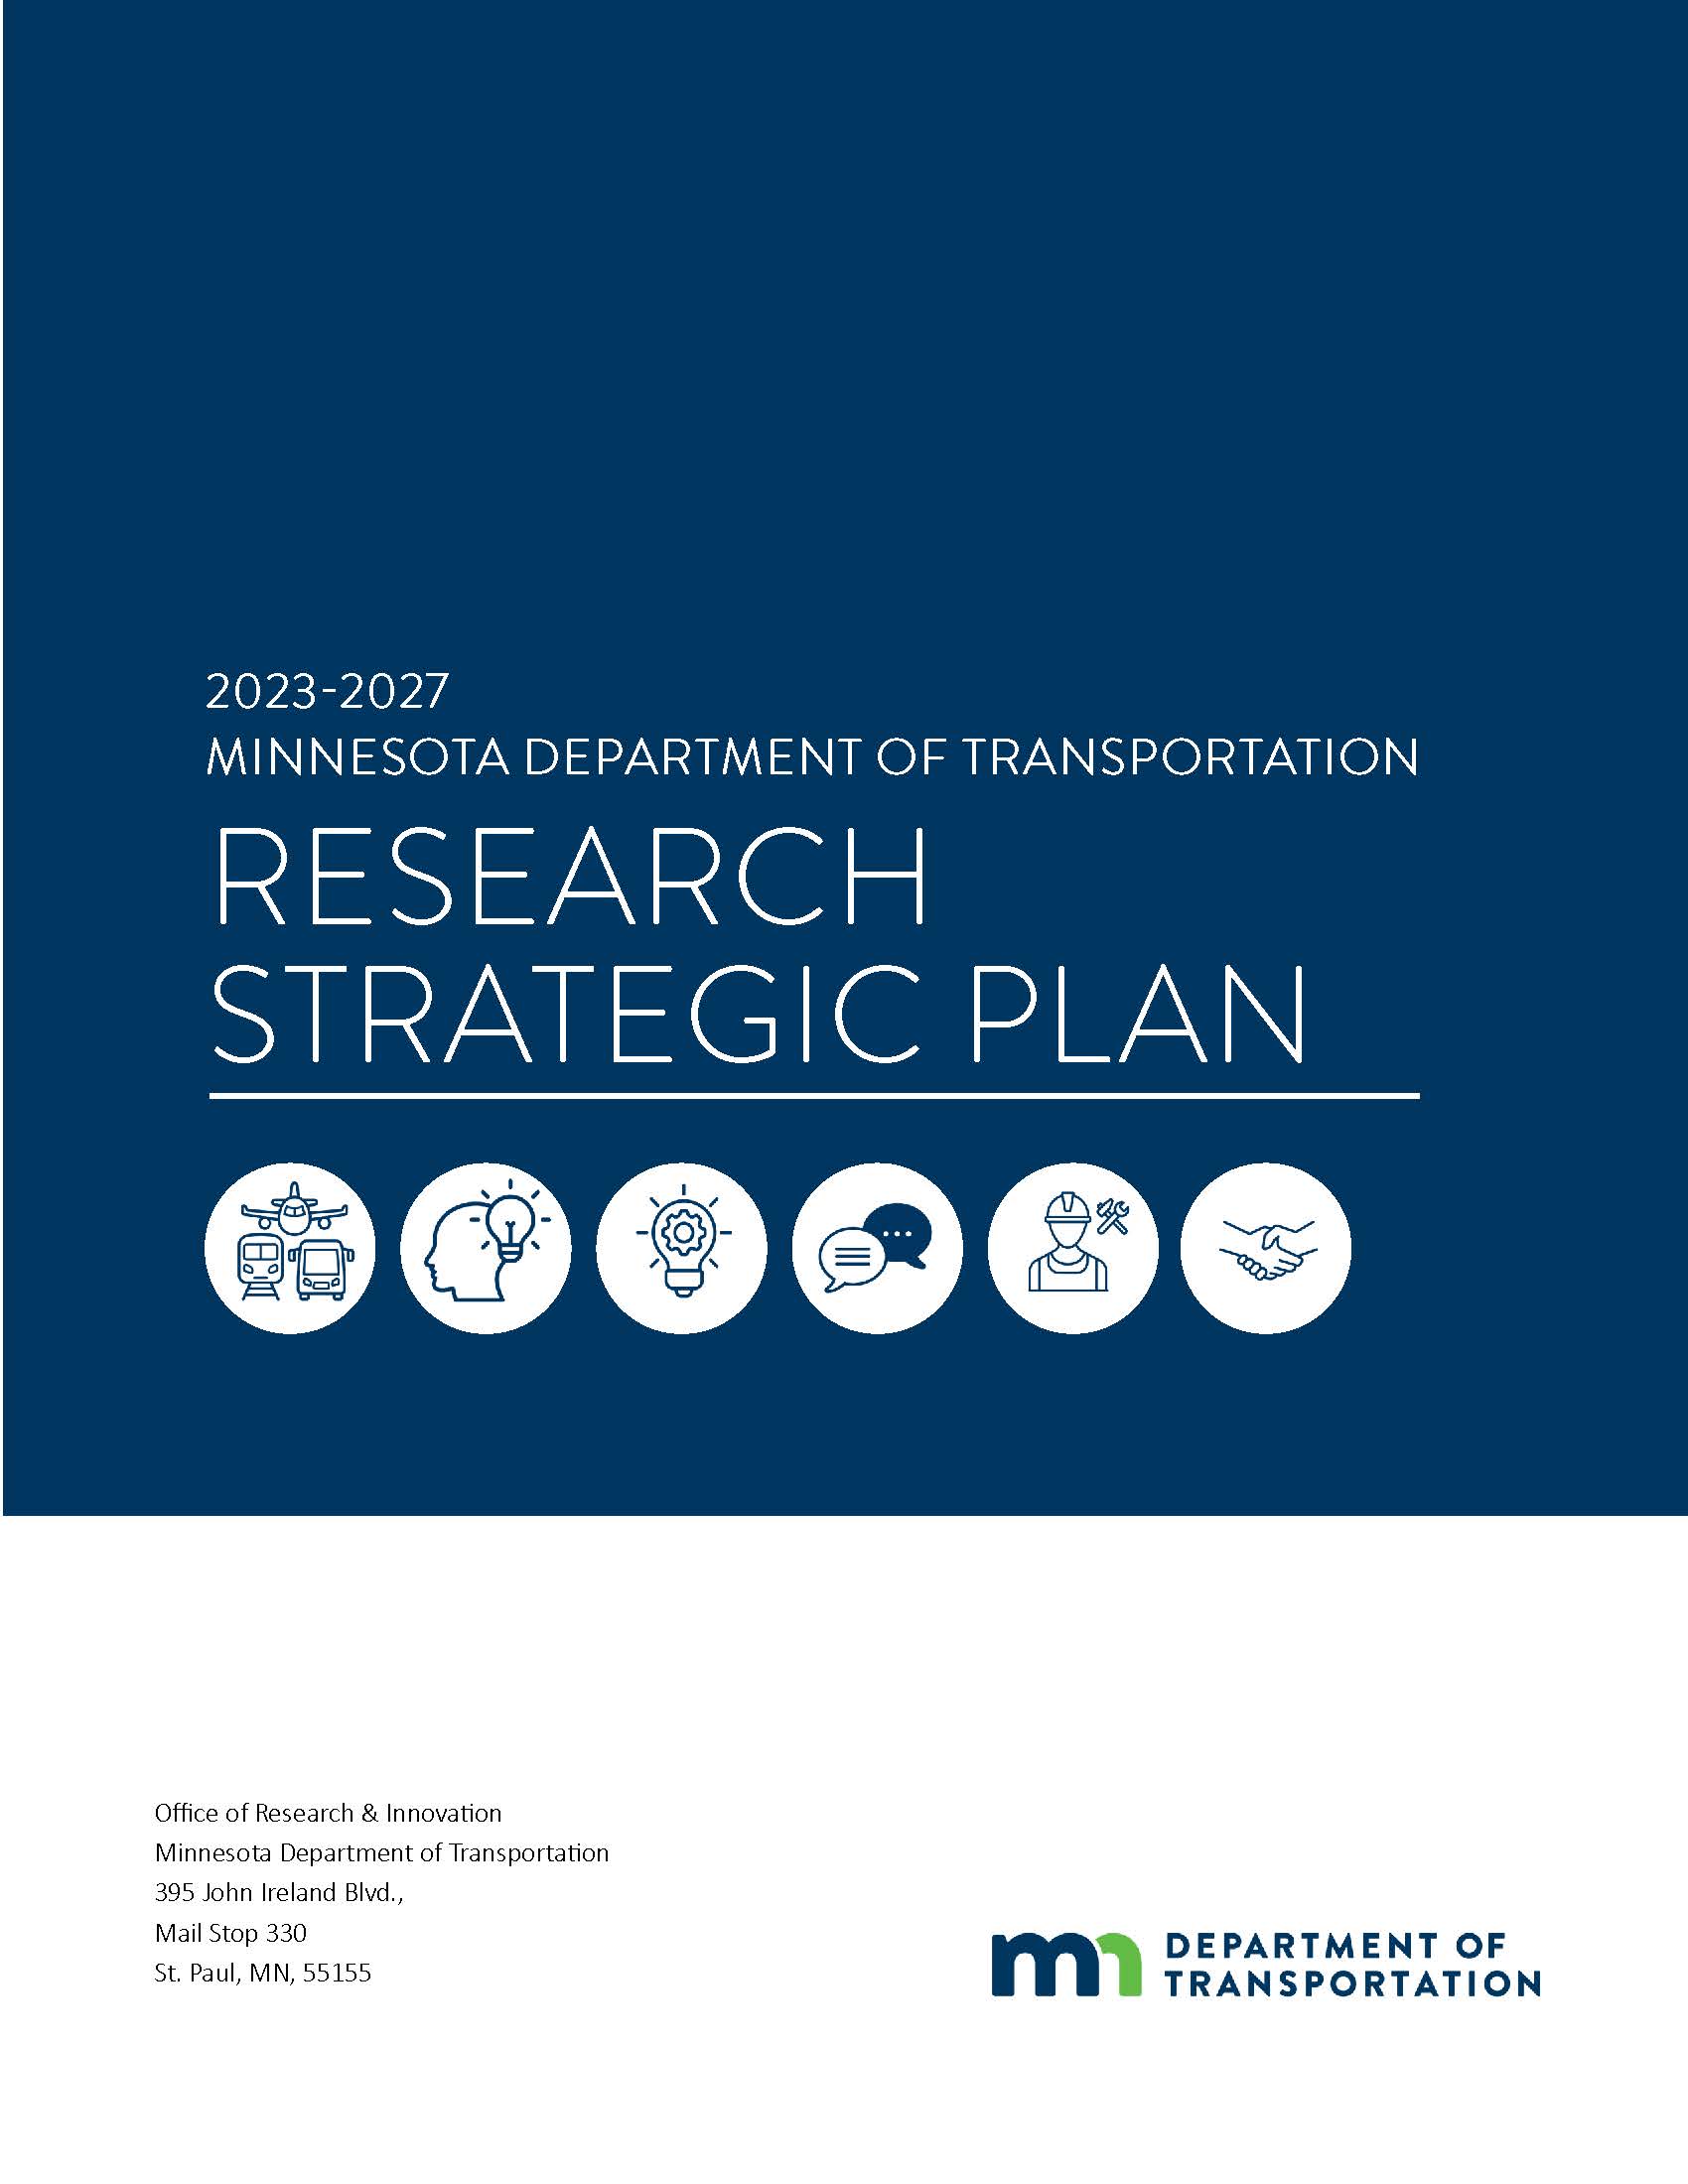 Cover of the 2023-2027 MnDOT Research Strategic Plan